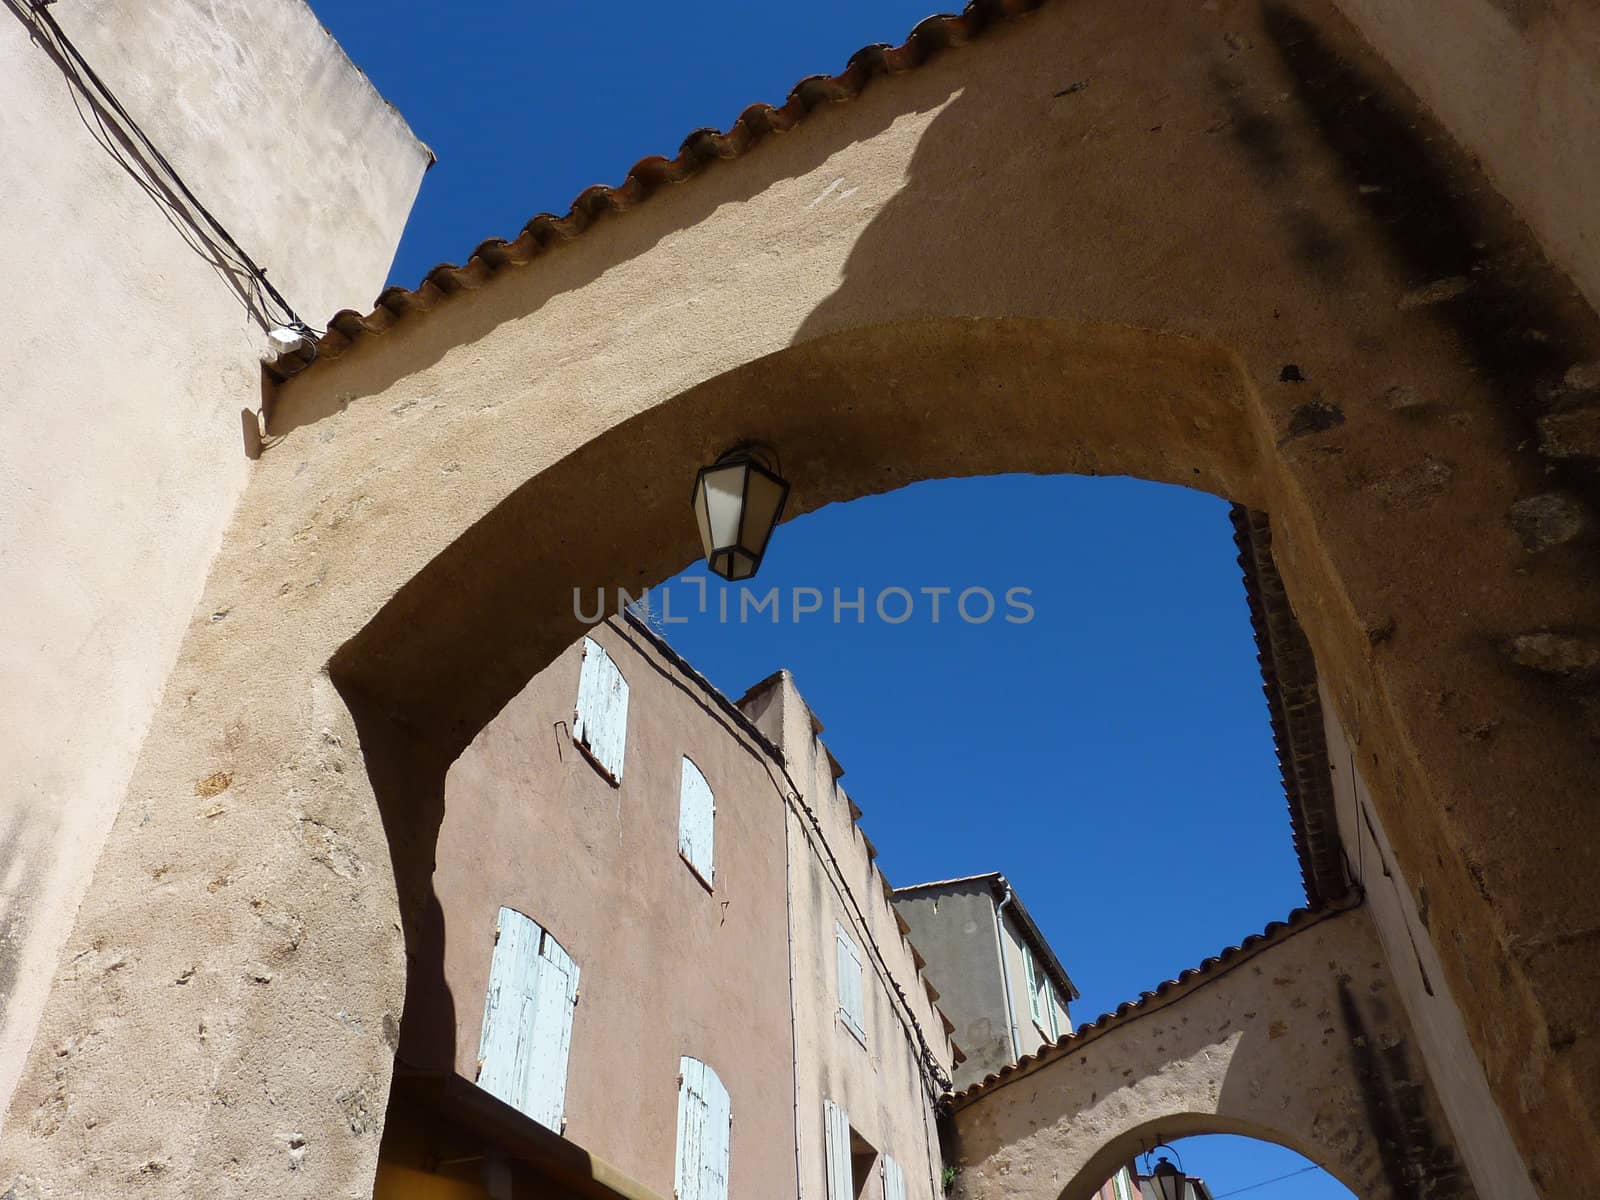 Arch with lamp and buildings with closed shutters in Saint-Tropez, France, by beautiful weather